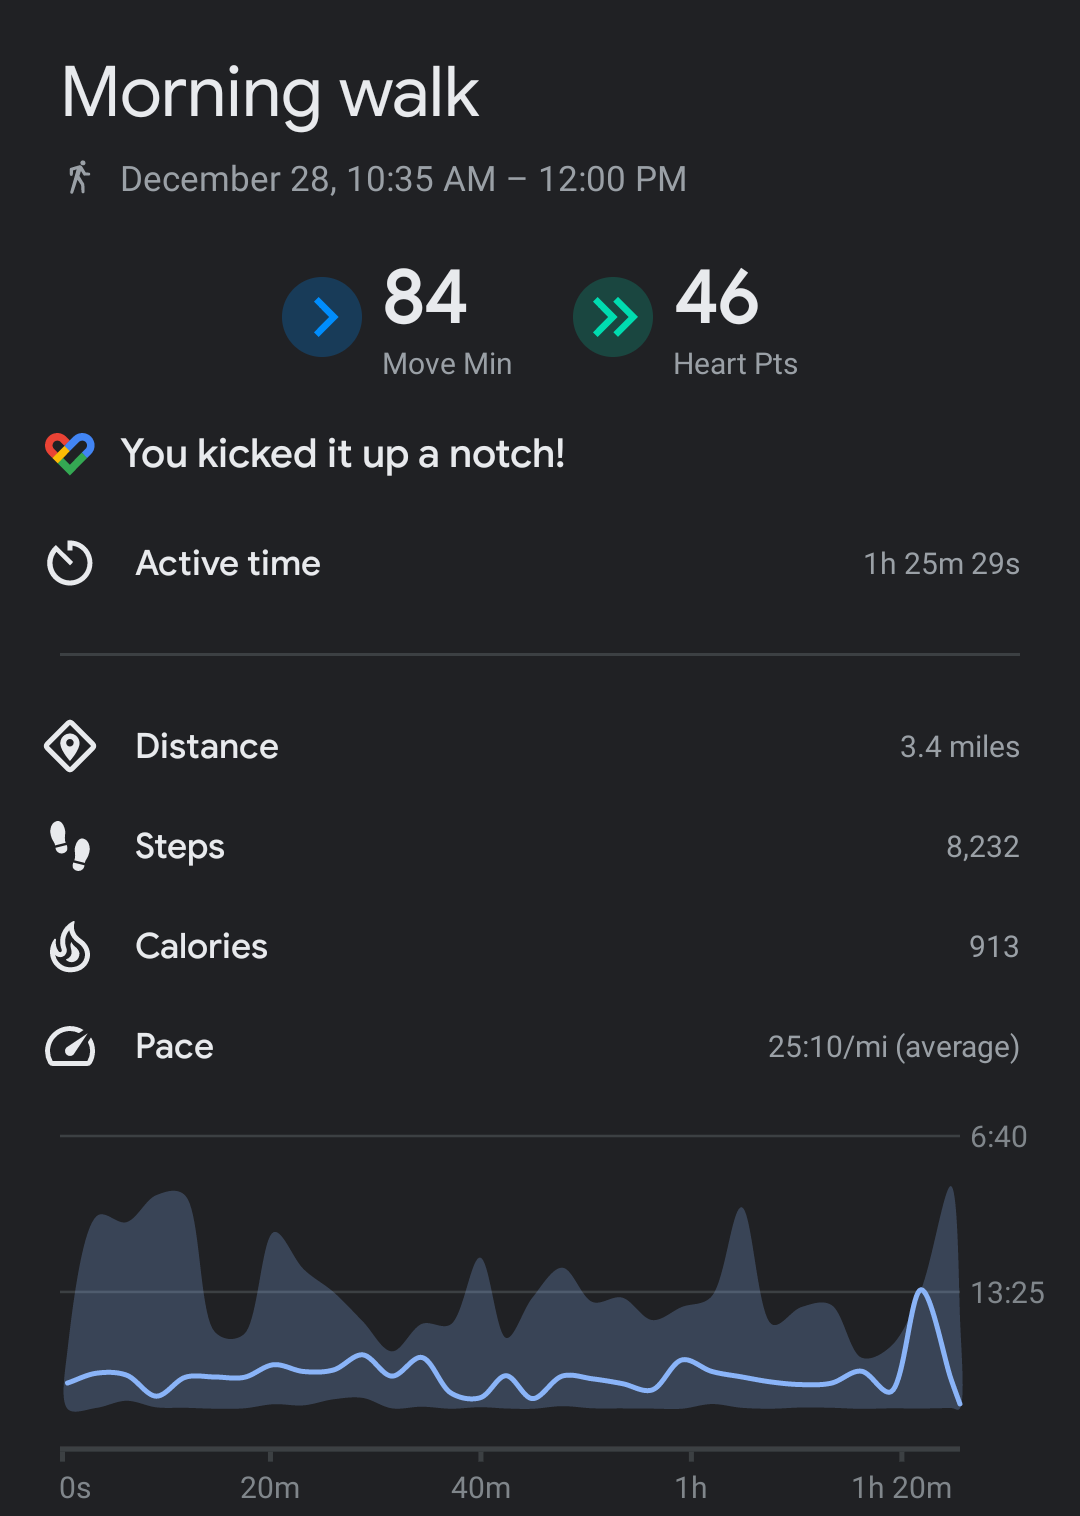 Google Fit stats for a 3.4 mile walk over 85 minutes. 